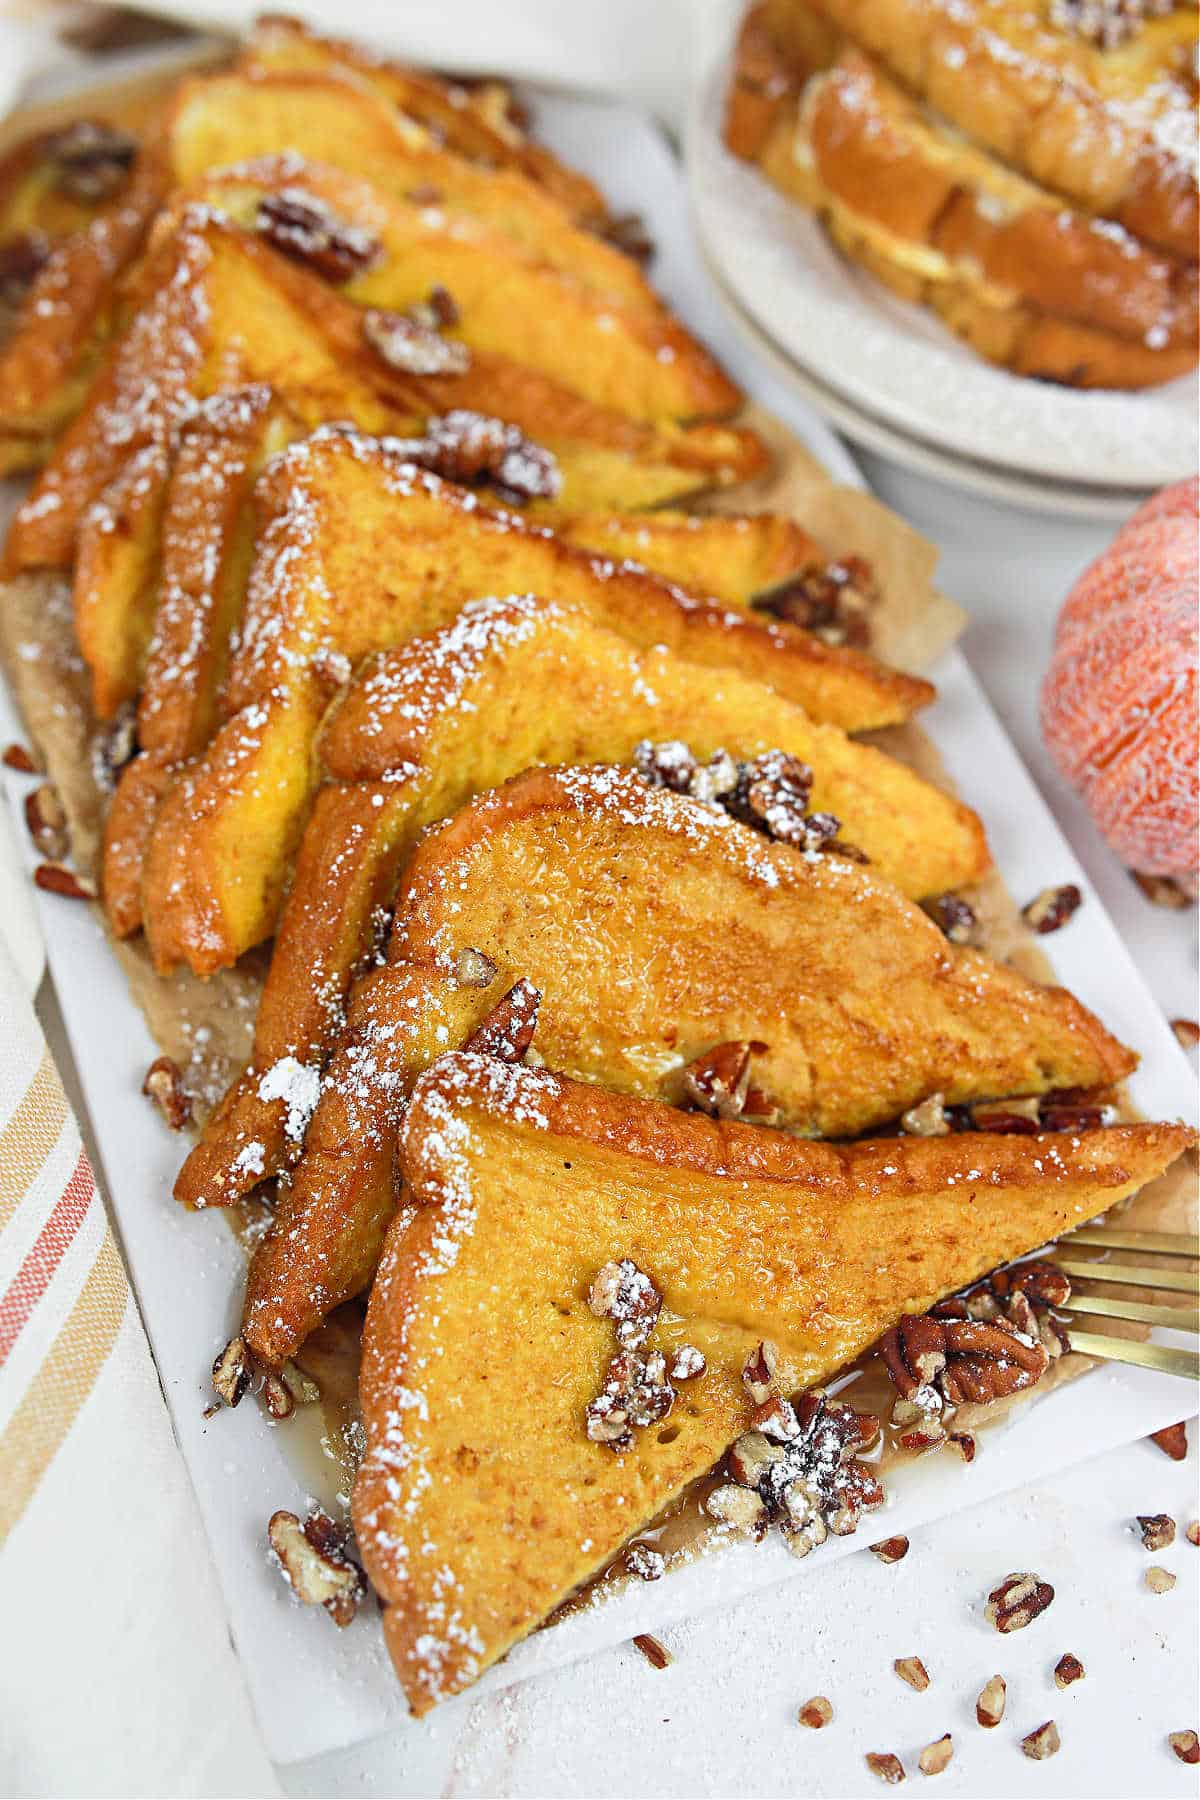 Pumpkin French Toast cut into triangles and topped with pecans, powdered sugar, and syrup.